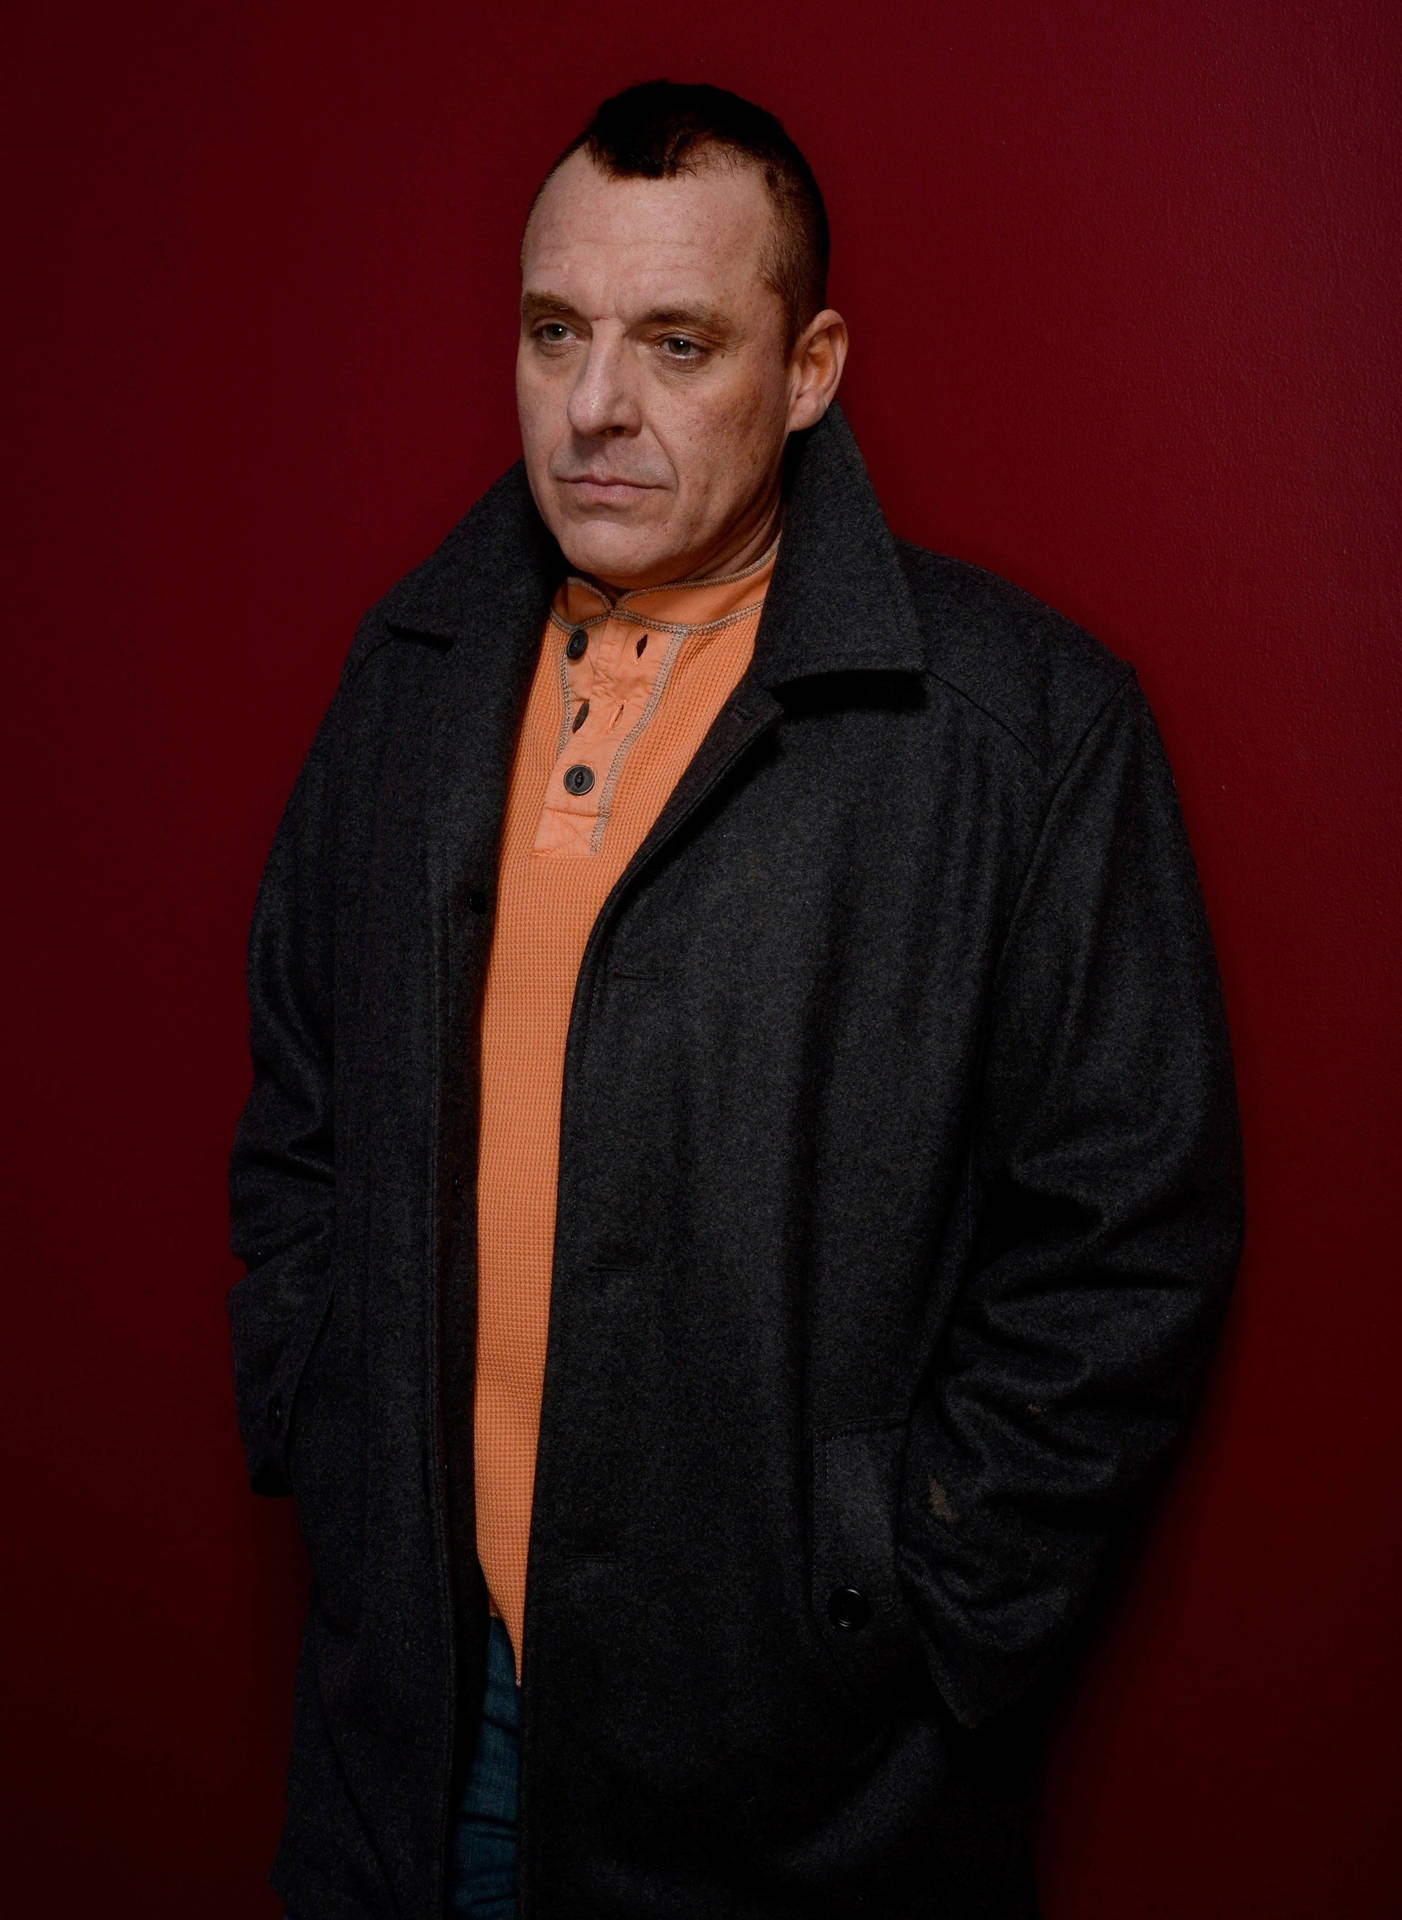 American Actor Tom Sizemore 2014 Photograph Wallpaper